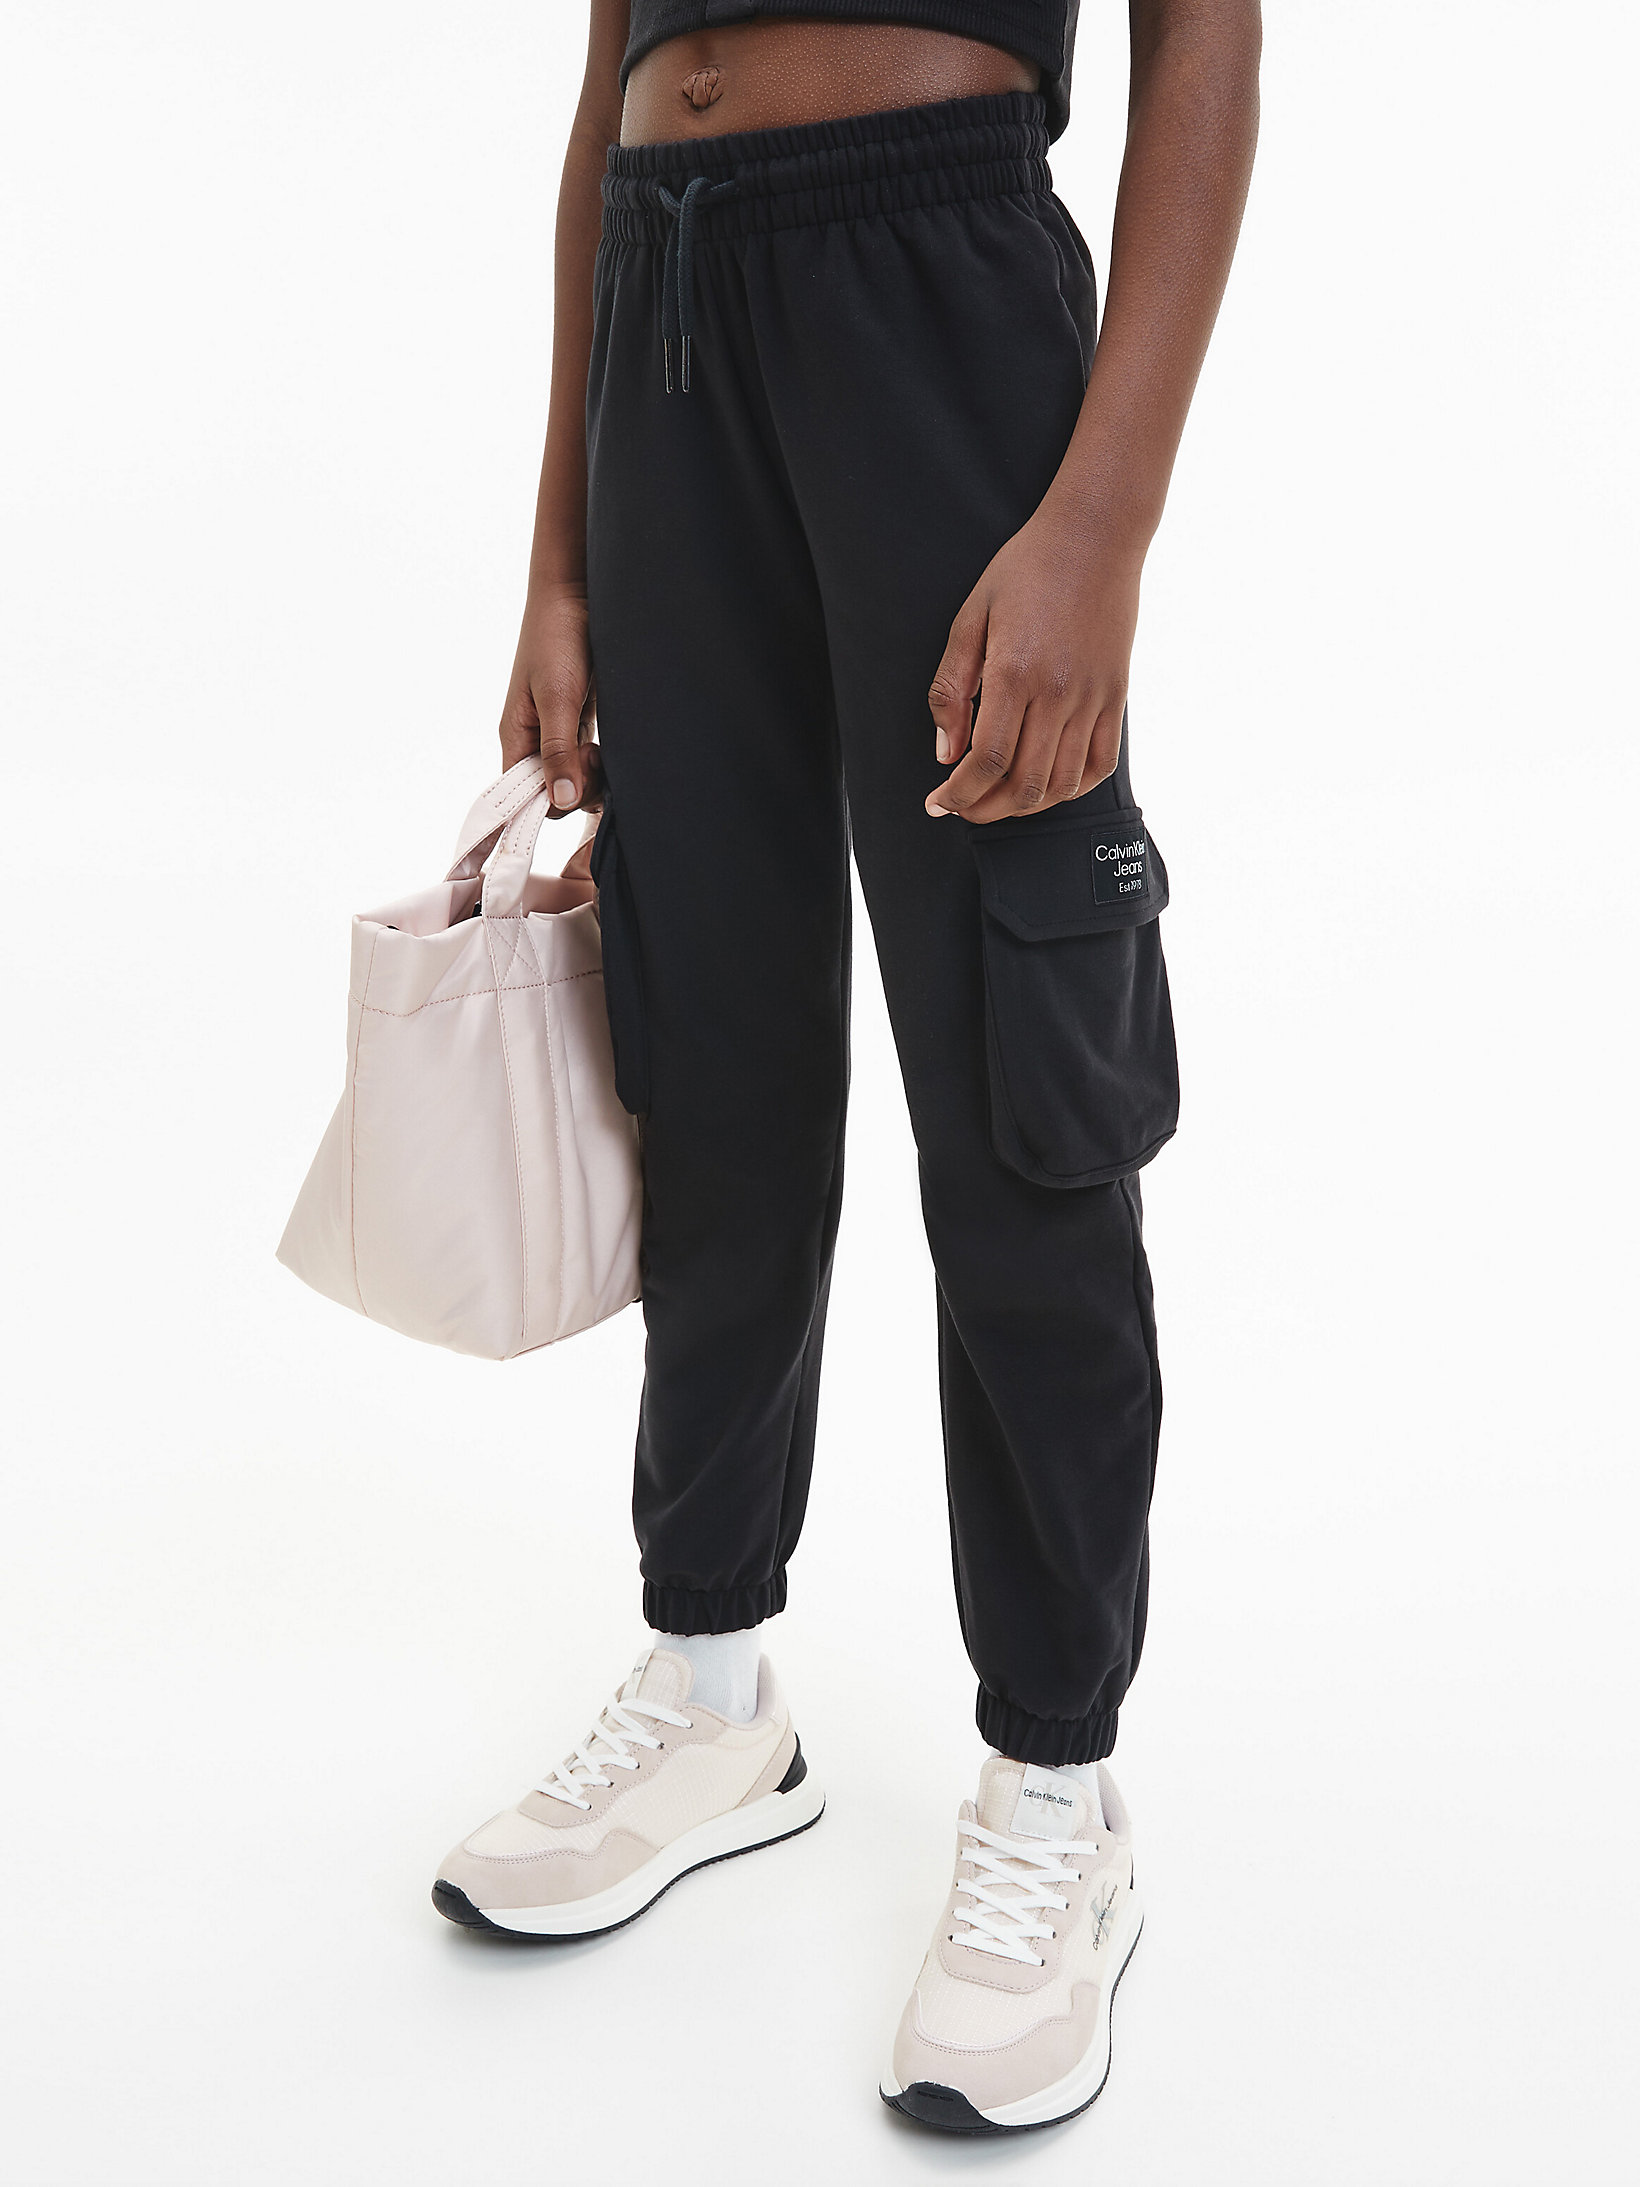 CK Black Relaxed Cargo Joggers undefined girls Calvin Klein